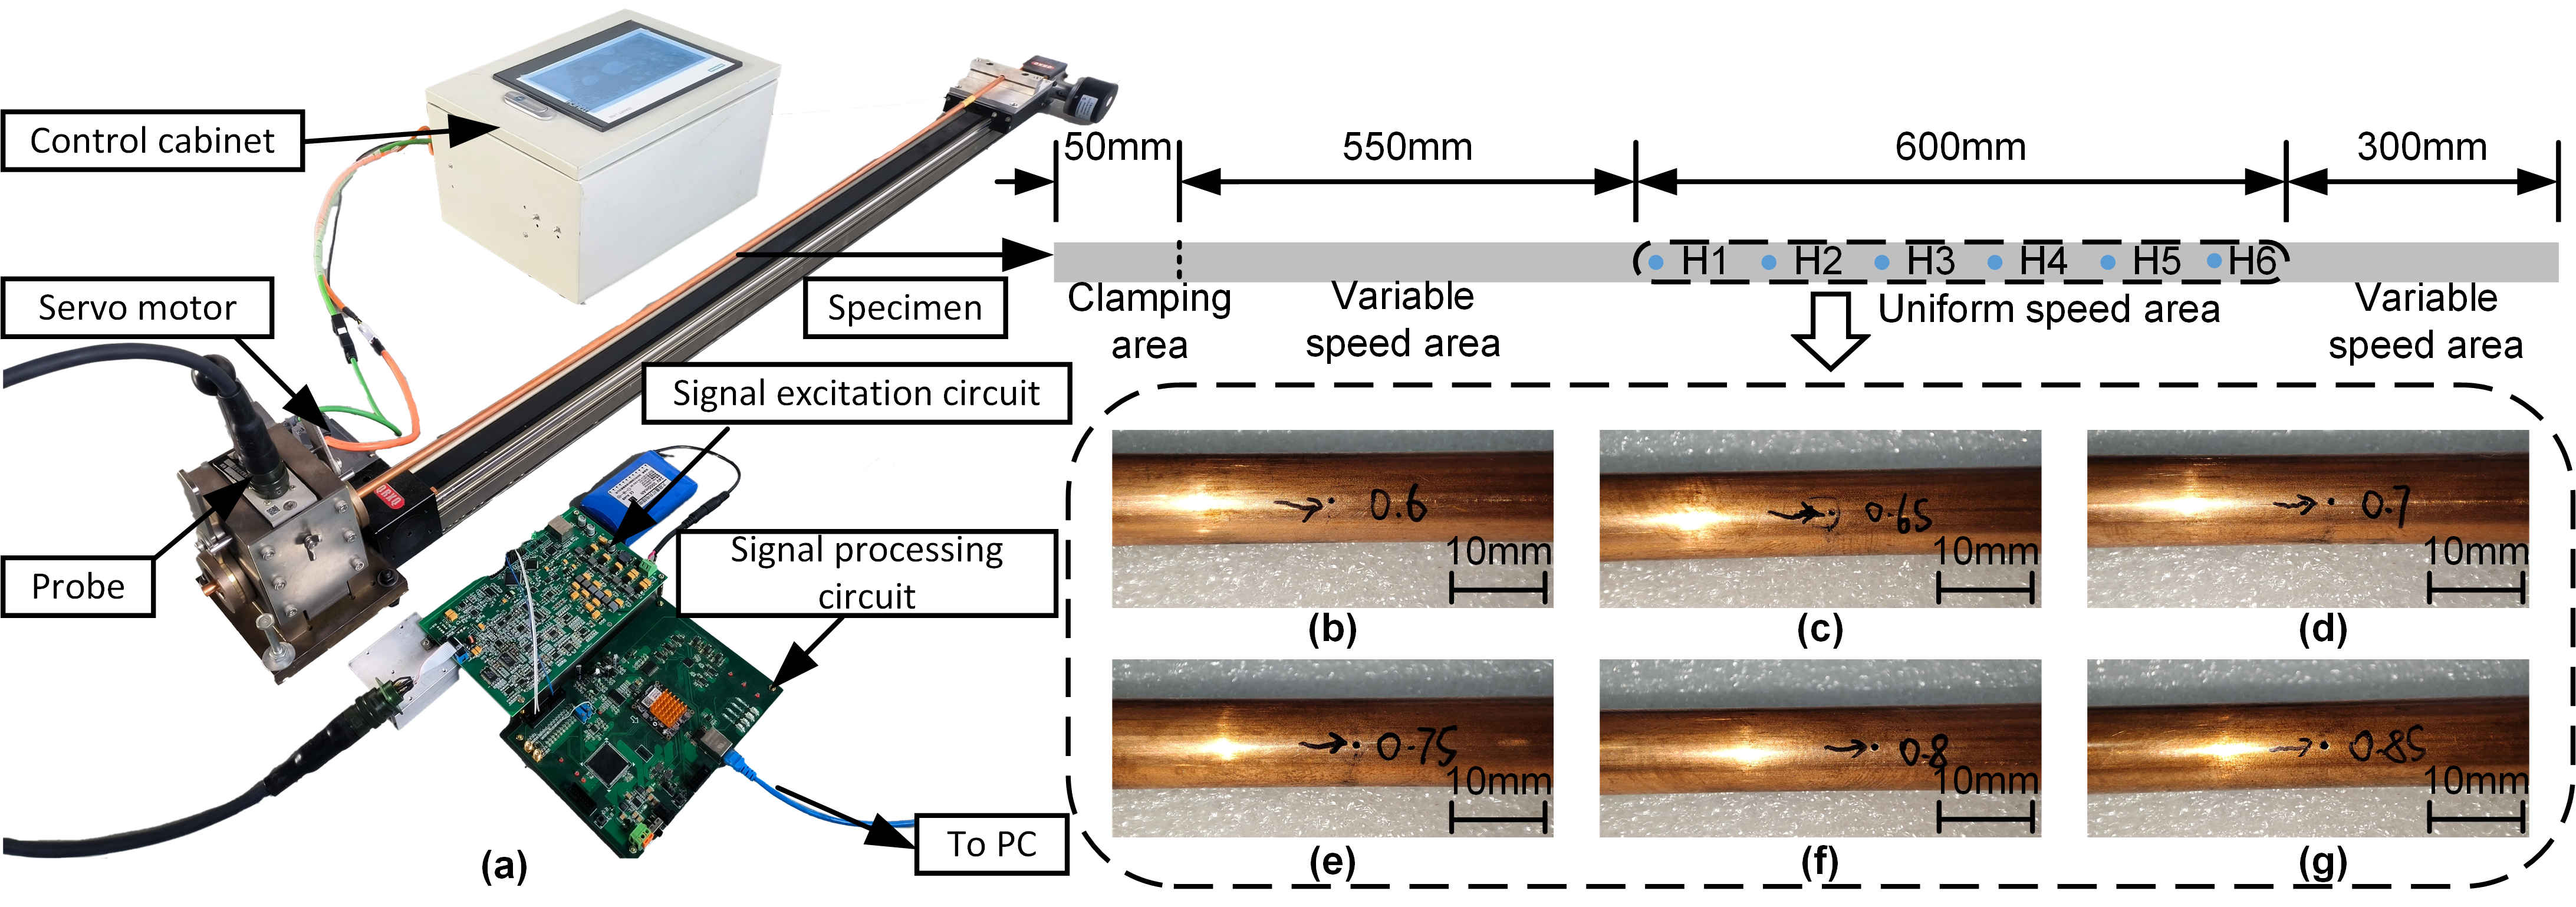 Fig. 2 Physical drawing of the detection system. (a)Through-type eddy current detection system. (b-g) The holes for Specimen 2 are as follows: 0.6 mm, 0.65 mm, 0.71 mm, 0.75 mm, 0.80 mm, 0.85 mm.